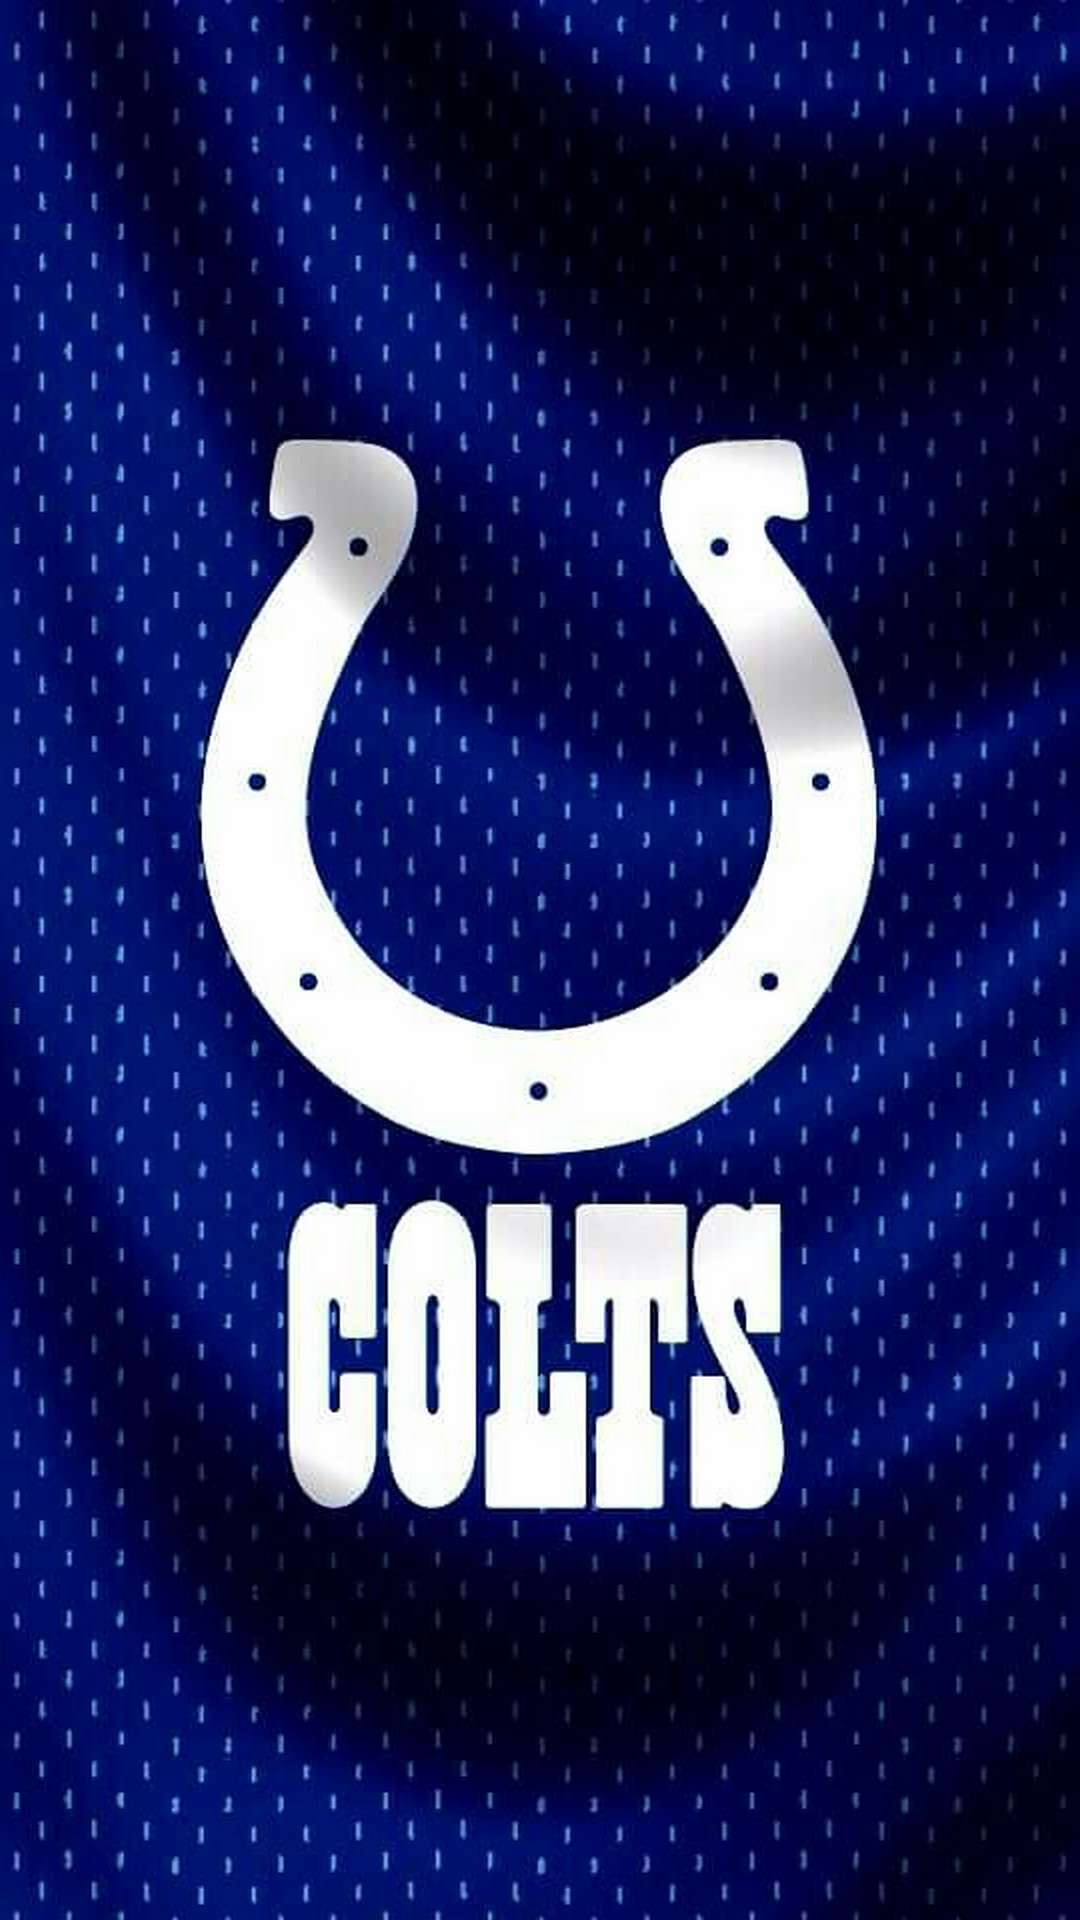 Indianapolis Colts iPhone Screen Wallpaper With high-resolution 1080X1920 pixel. Donwload and set as wallpaper for your iPhone X, iPhone XS home screen backgrounds, XS Max, XR, iPhone8 lock screen wallpaper, iPhone 7, 6, SE, and other mobile devices